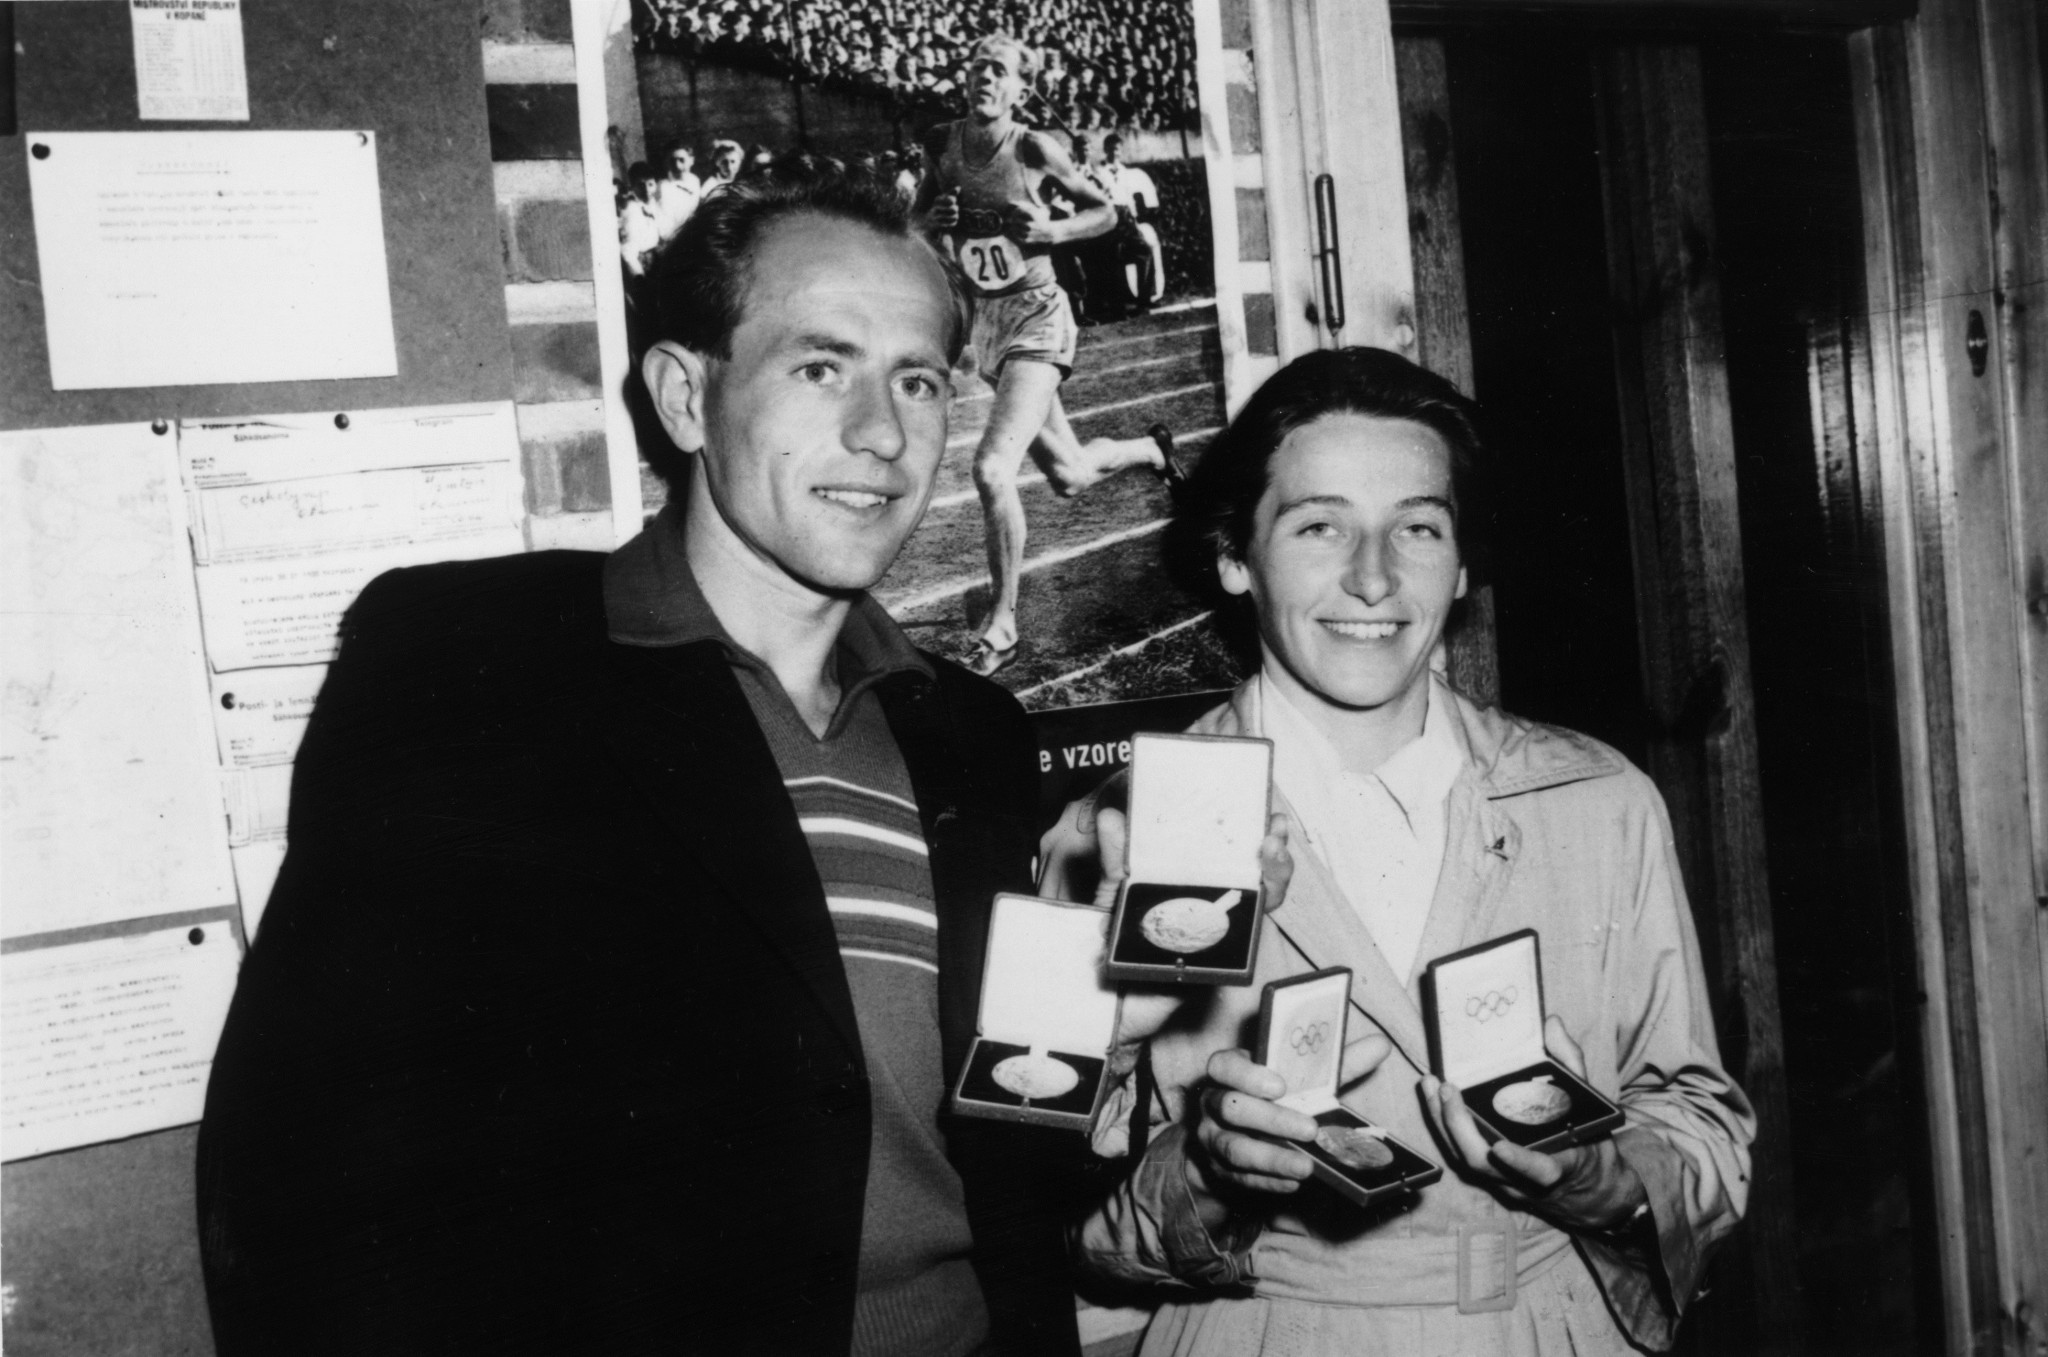 Dana Zátopková and her husband Emil Zátopek show off their four gold medals from Helsinki 1952 ©Getty Images